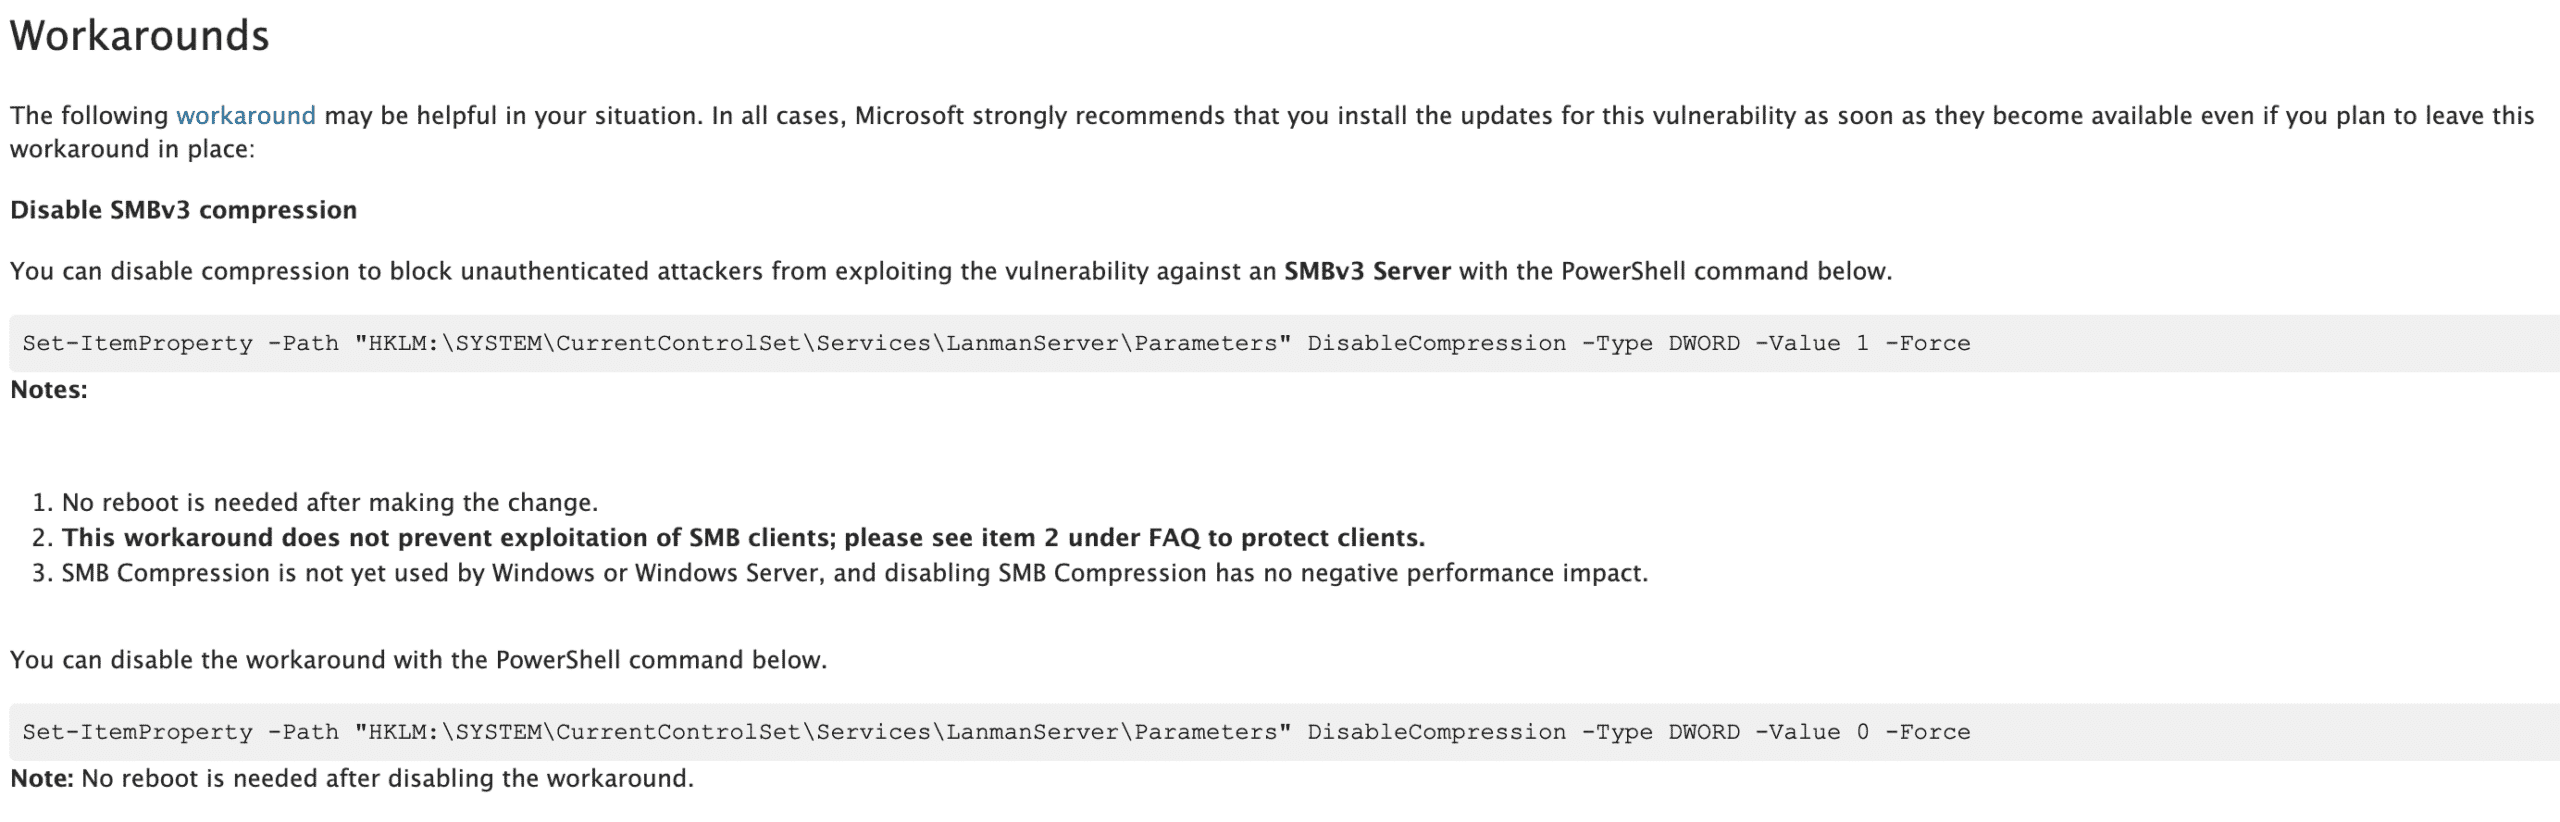 Microsoft Instructions for Disabling SMBv3 Compression